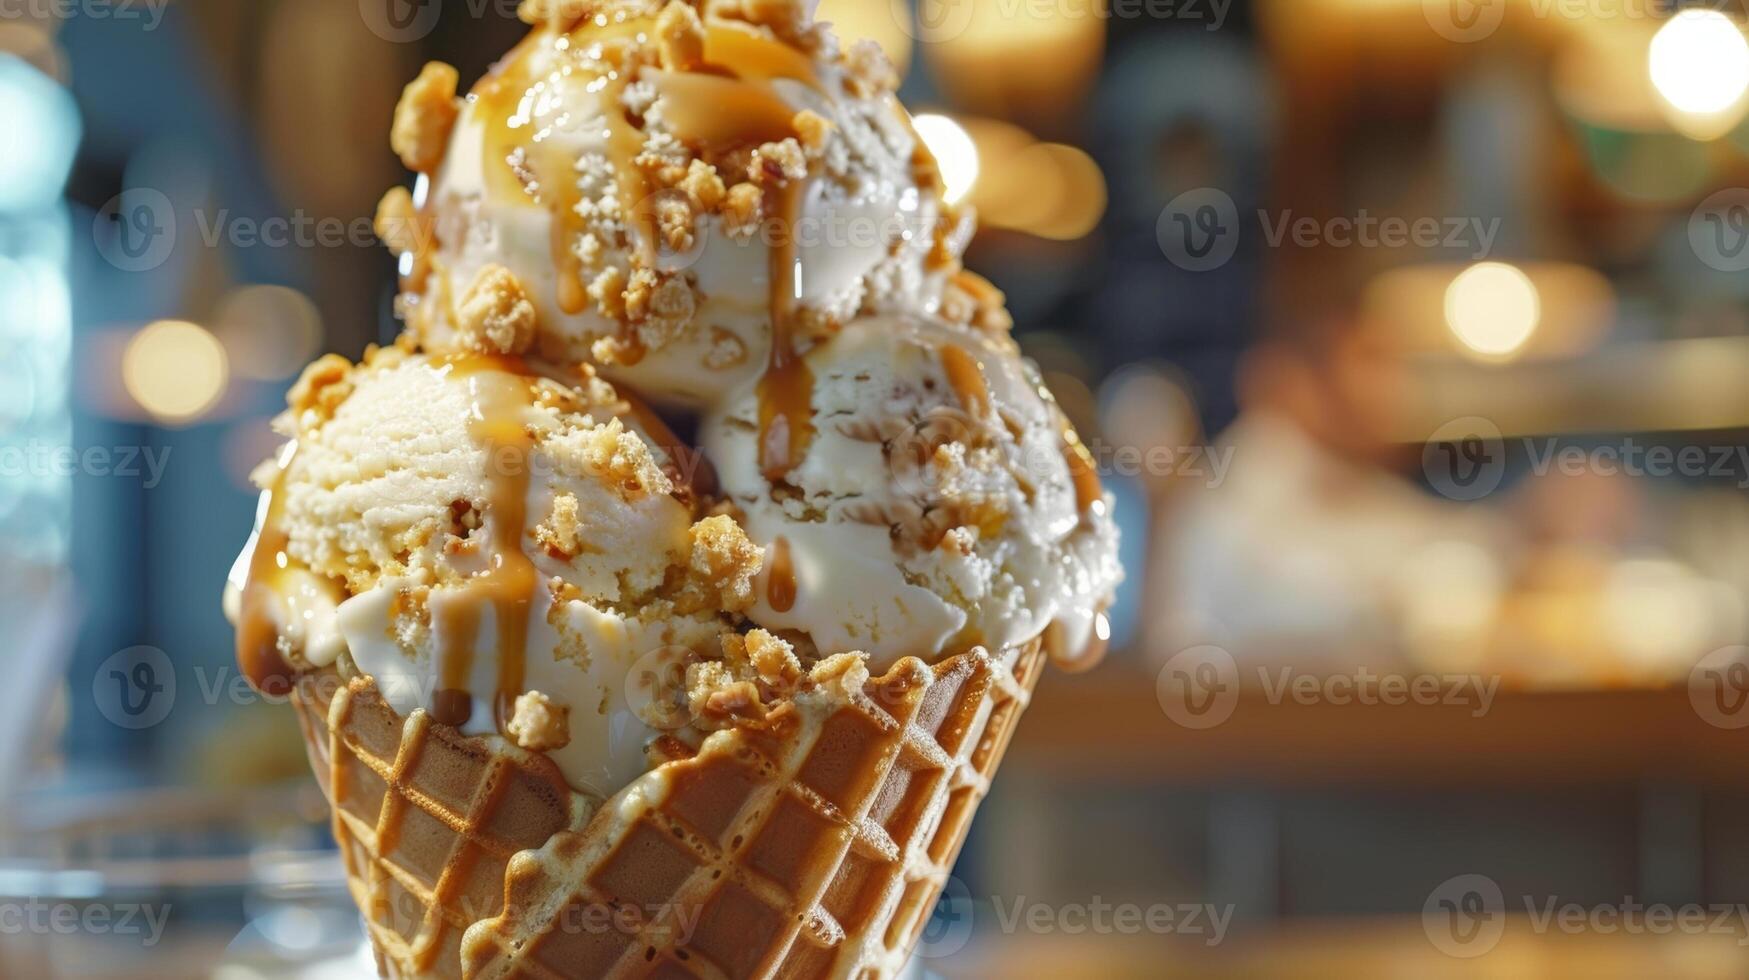 A close up of a waffle cone overflowing with scoops of artisanal ice cream drizzled with caramel sauce and sprinkled with crushed nuts photo